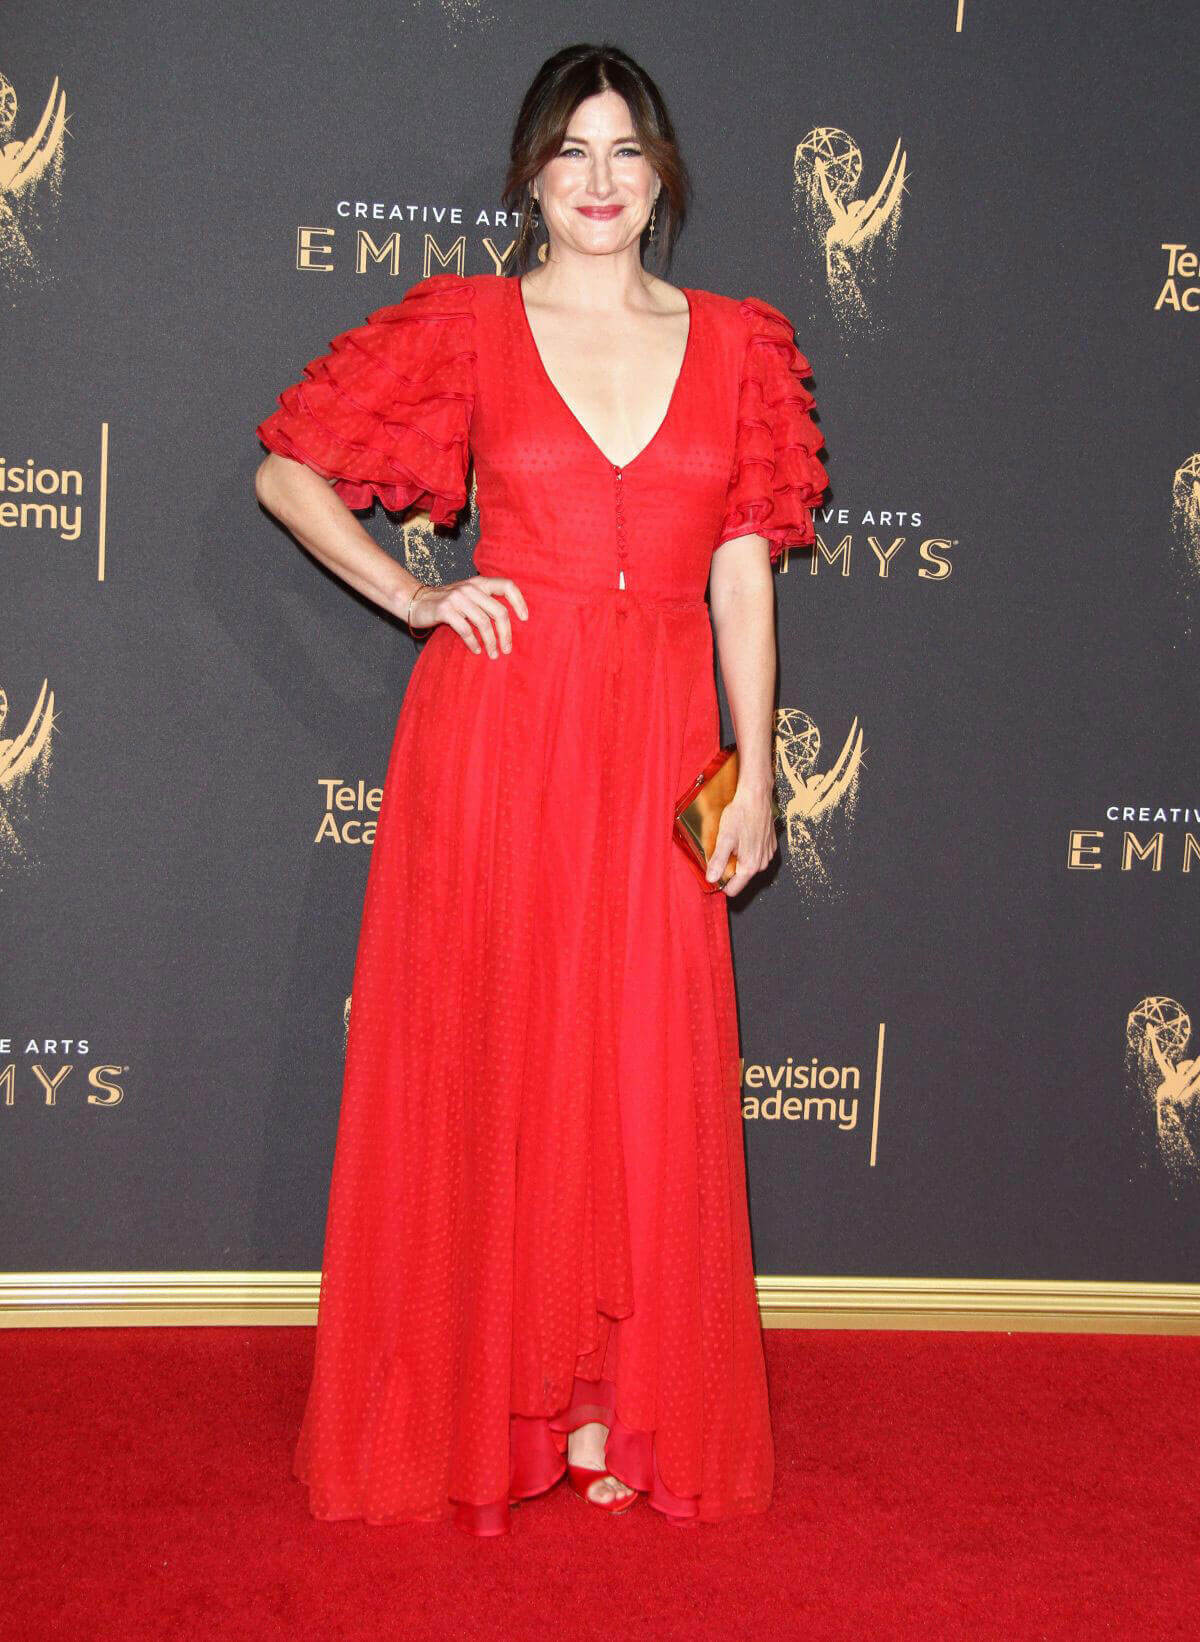 Kathryn Hahn at Creative Arts Emmy Awards in Los Angeles